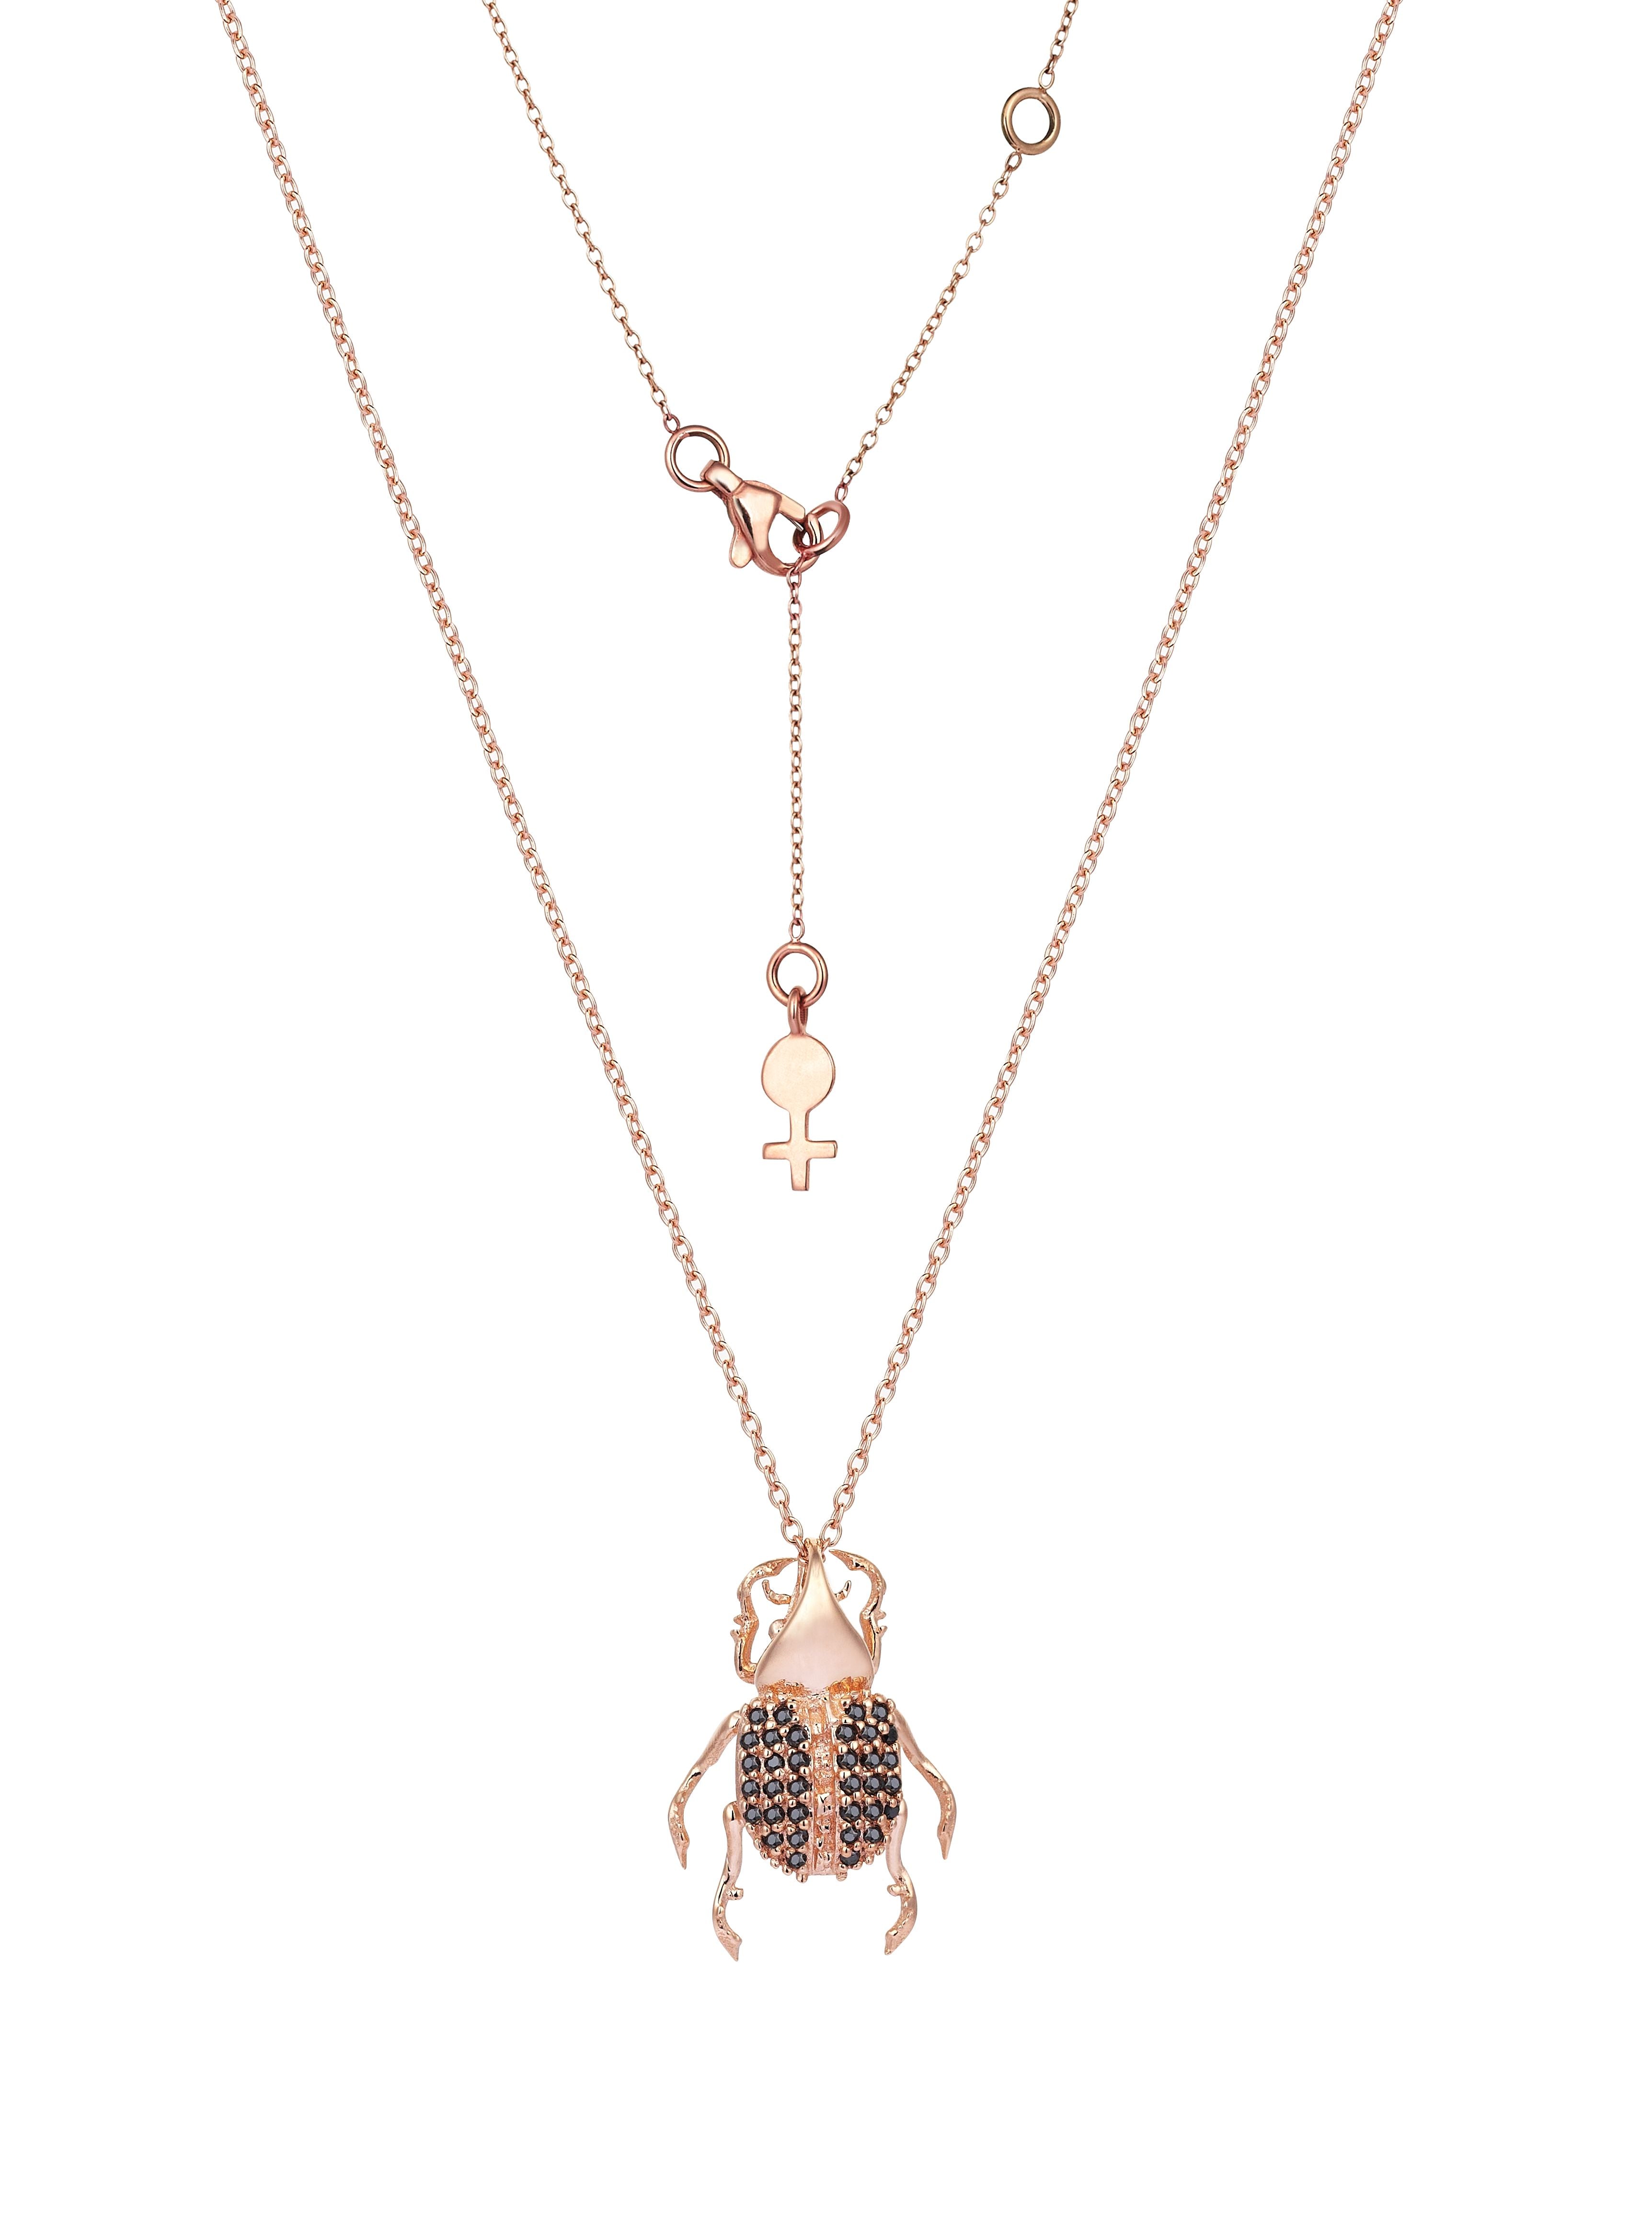 Rhino Beetle Necklace in Rose Gold - Her Story Shop